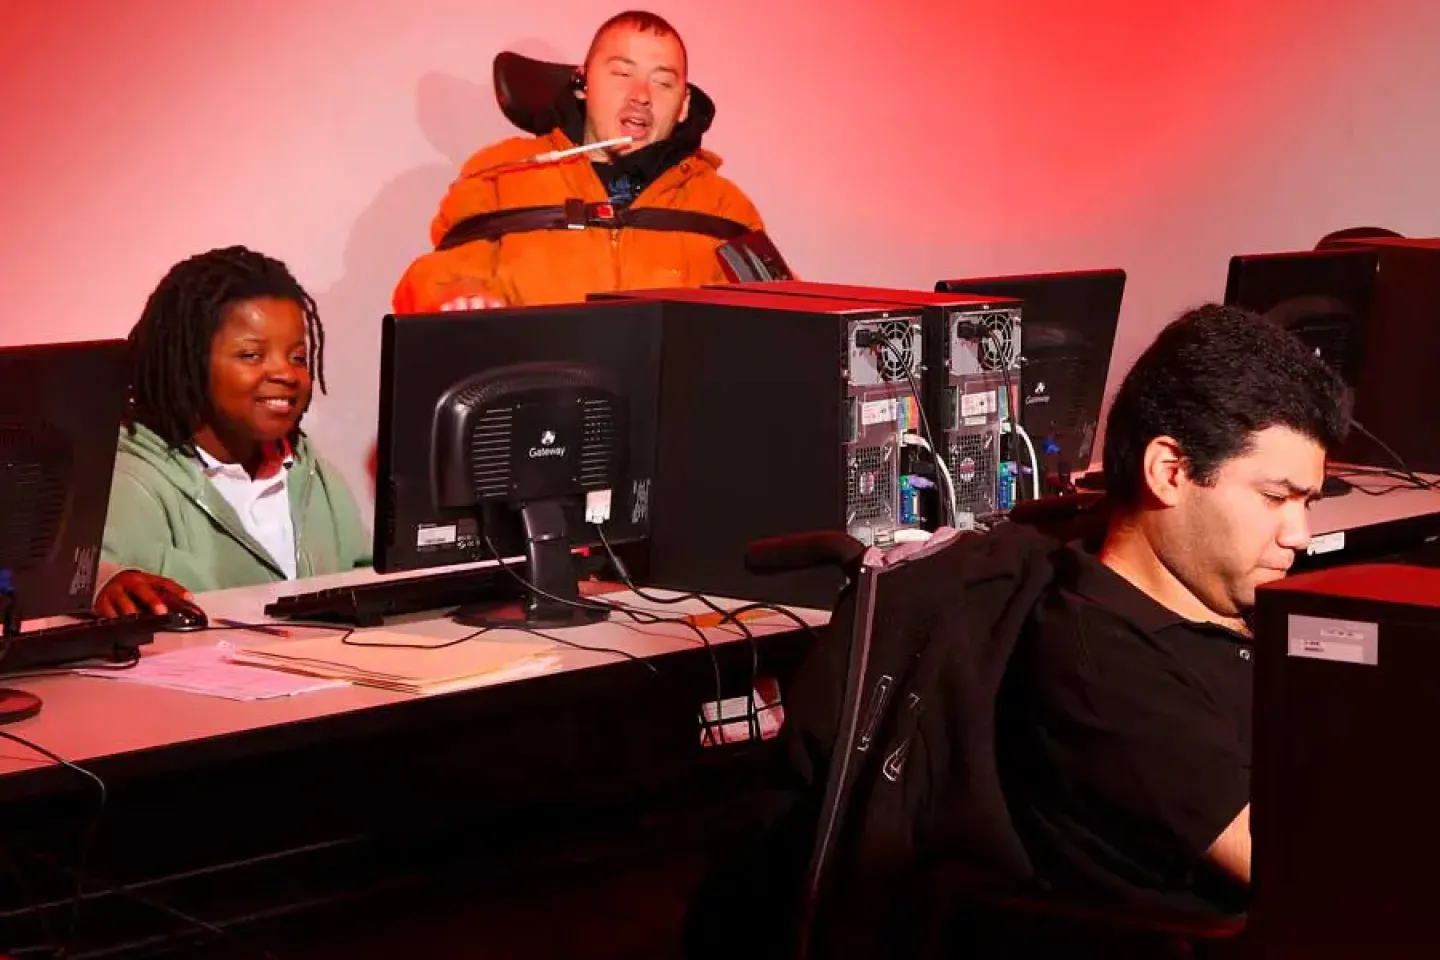 people with disabilities working on desktop workstations.